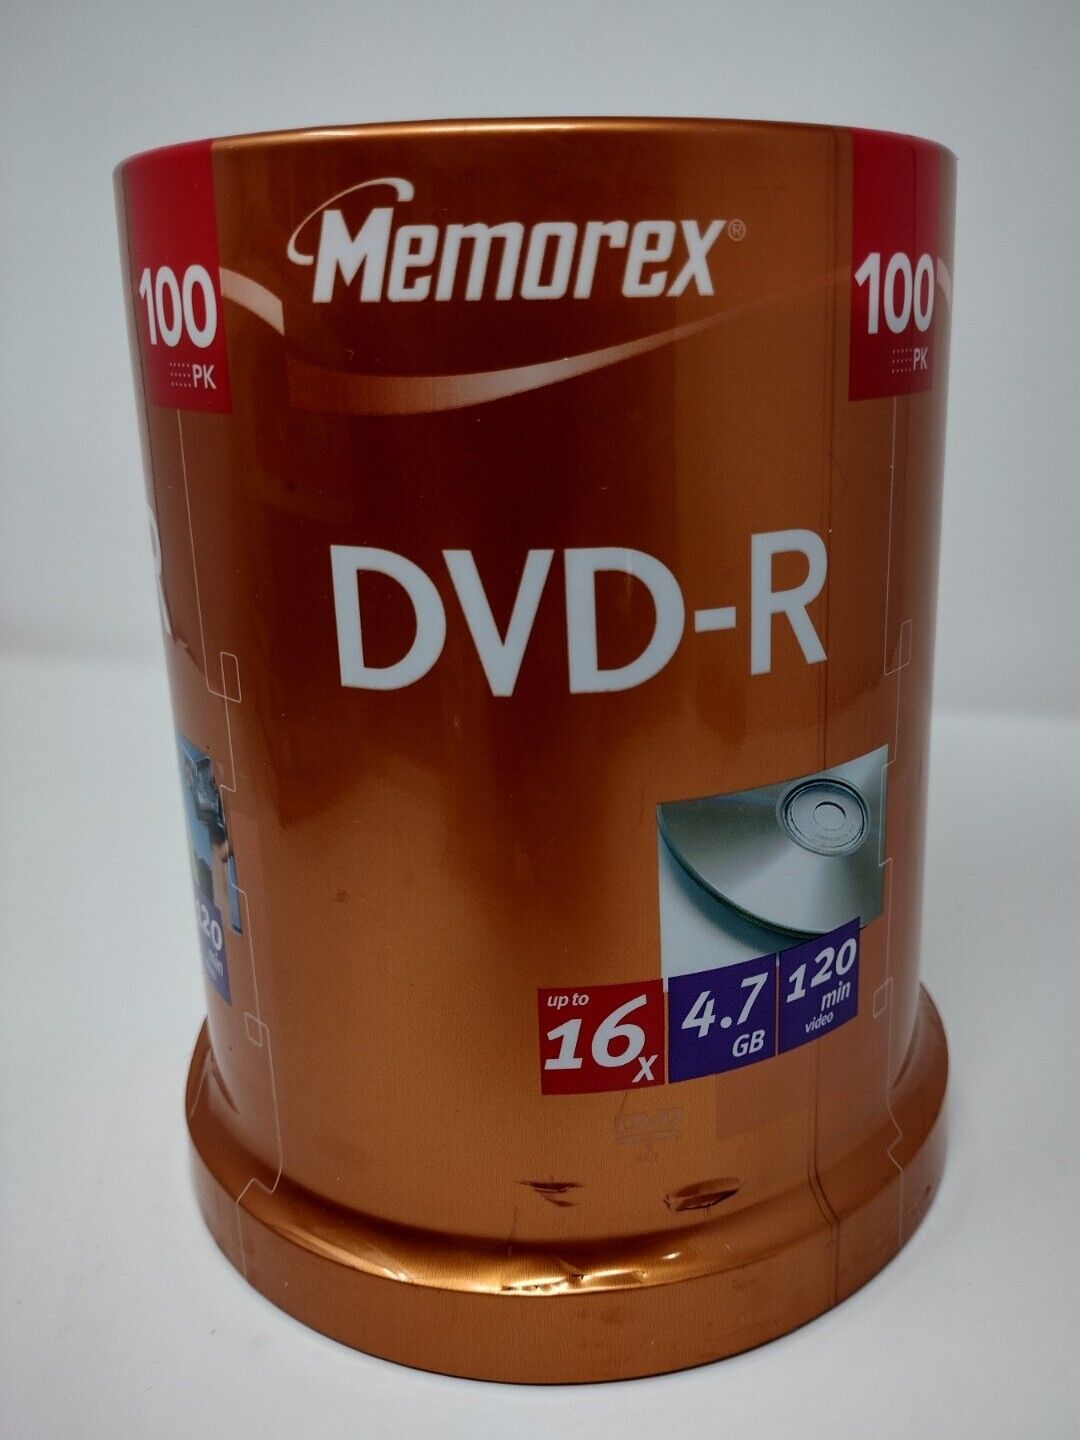 Memorex DVD-R 100 Pack 4.7 GB Up To 16X Speed NEW SEALED Recordable Blank Discs